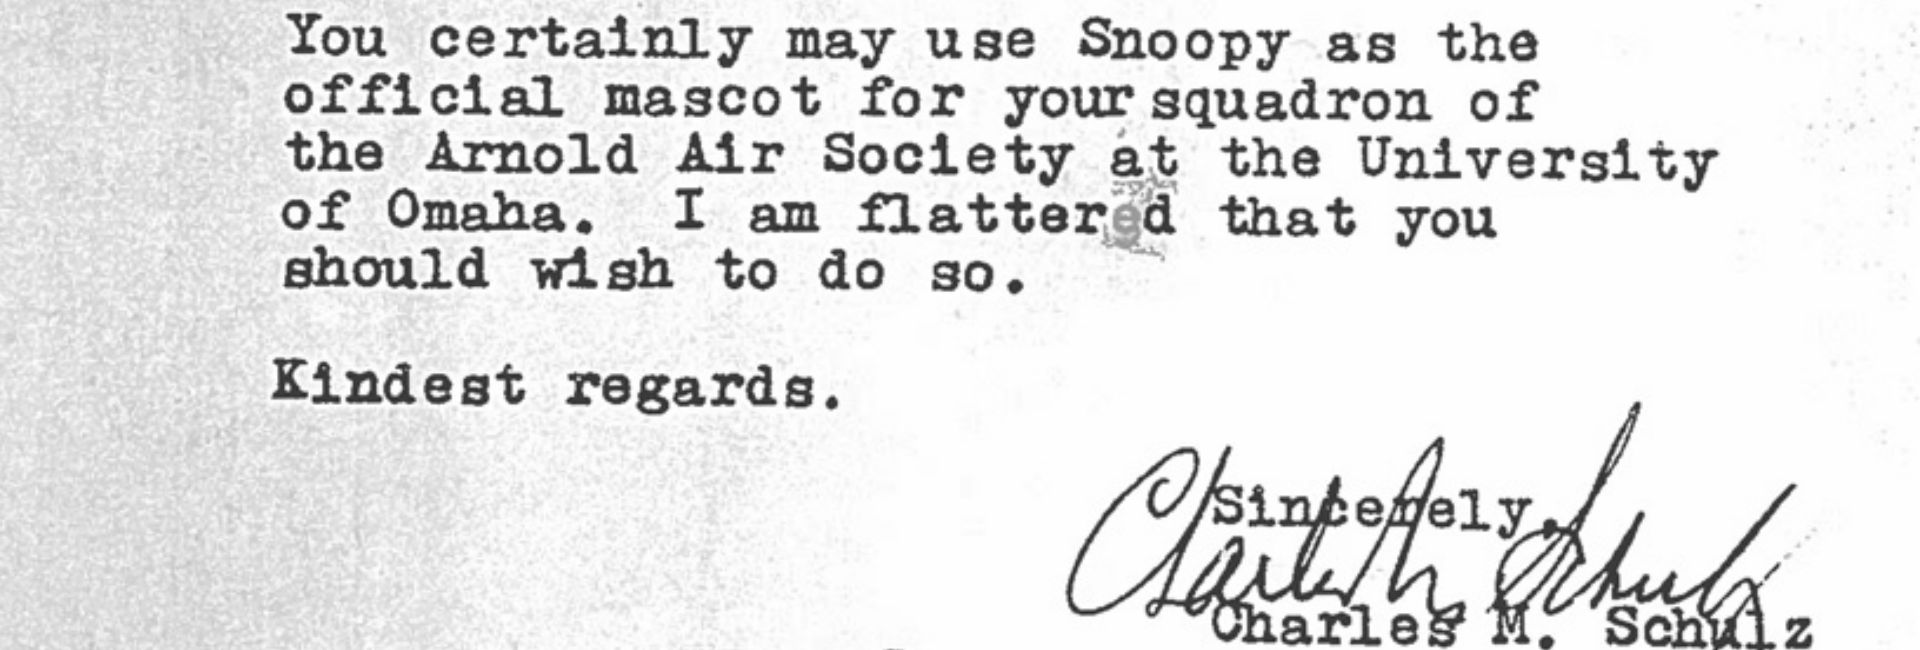 letter from snoopy creator